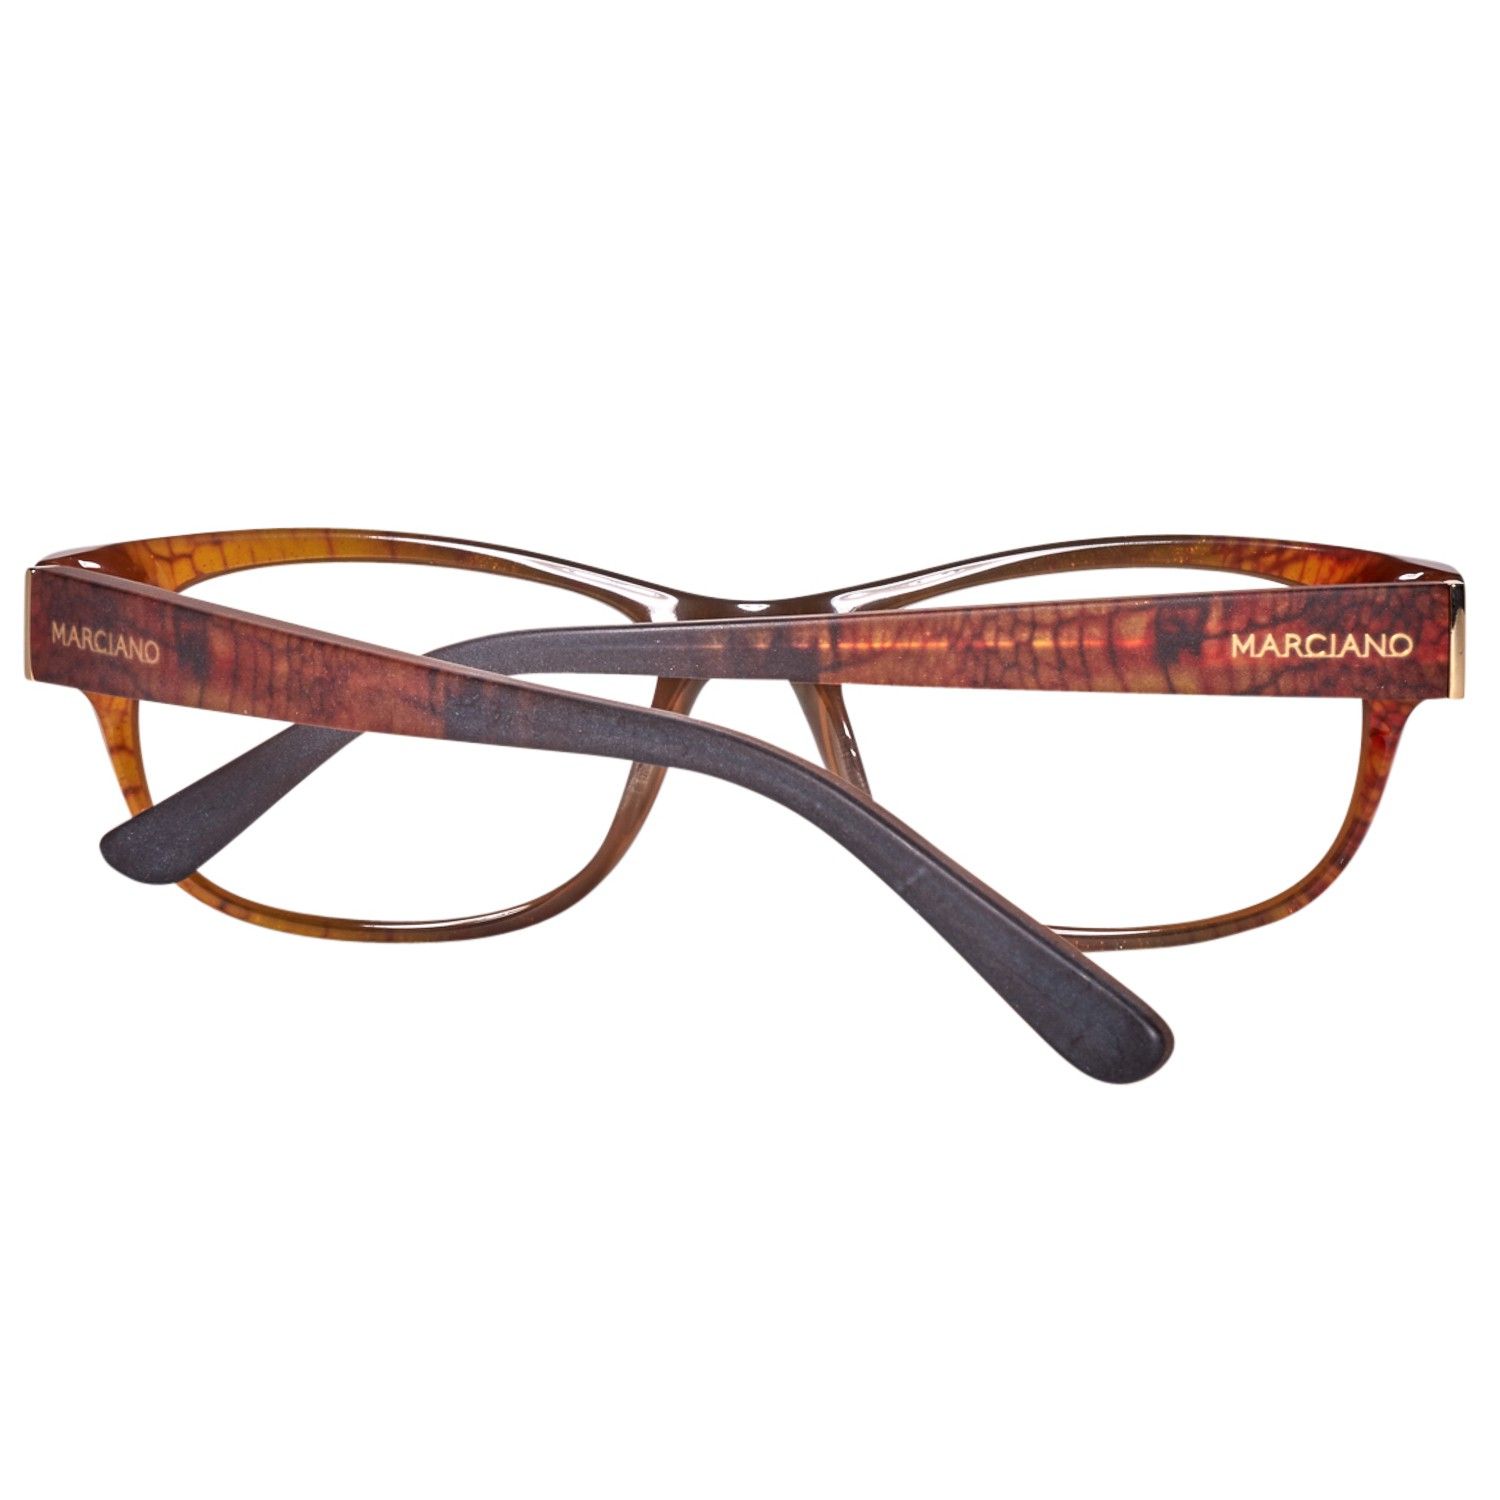 Guess By Marciano Optical Frame GM0261 050 53
Frame color: Brown
Lenses width: 53
Lenses heigth: 35
Bridge length: 17
Frame width: 137
Temple length: 135
Shipment includes: Case, Cleaning cloth
Style: Full-Rim
Women: Women